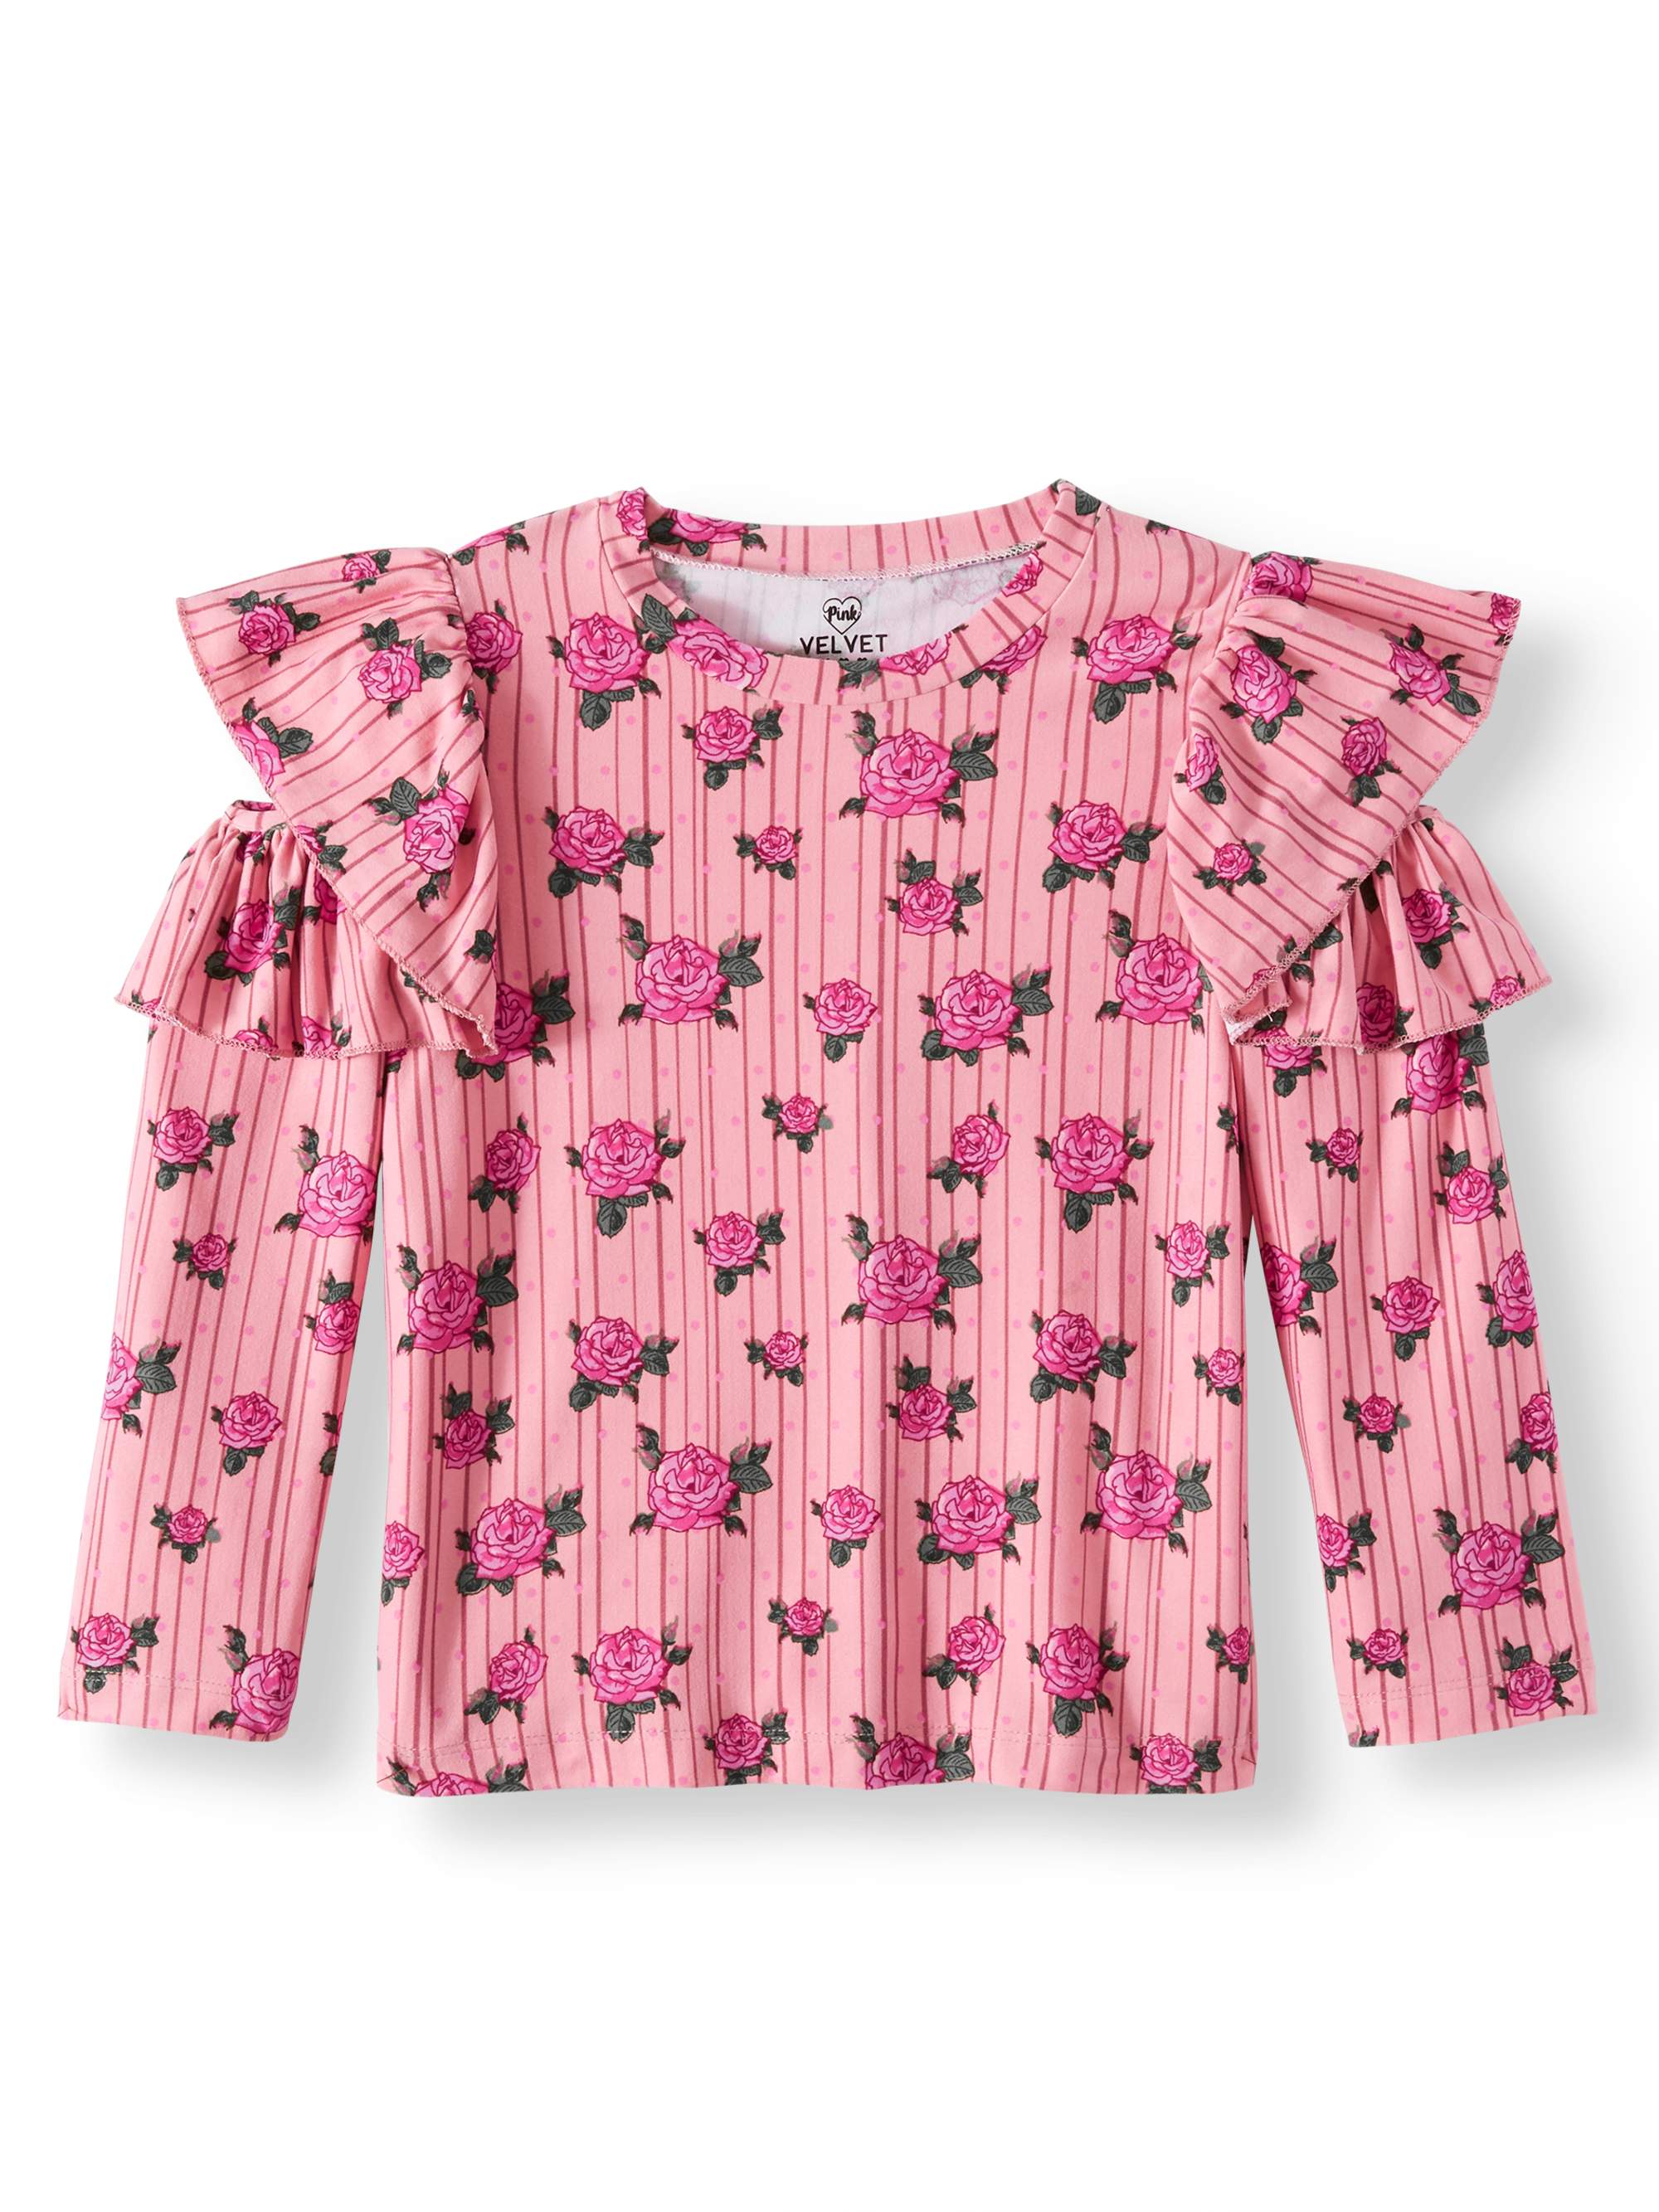 Floral Cut Out Ruffle Sleeve Yummy Top (Little Girls & Big Girls) - image 1 of 3